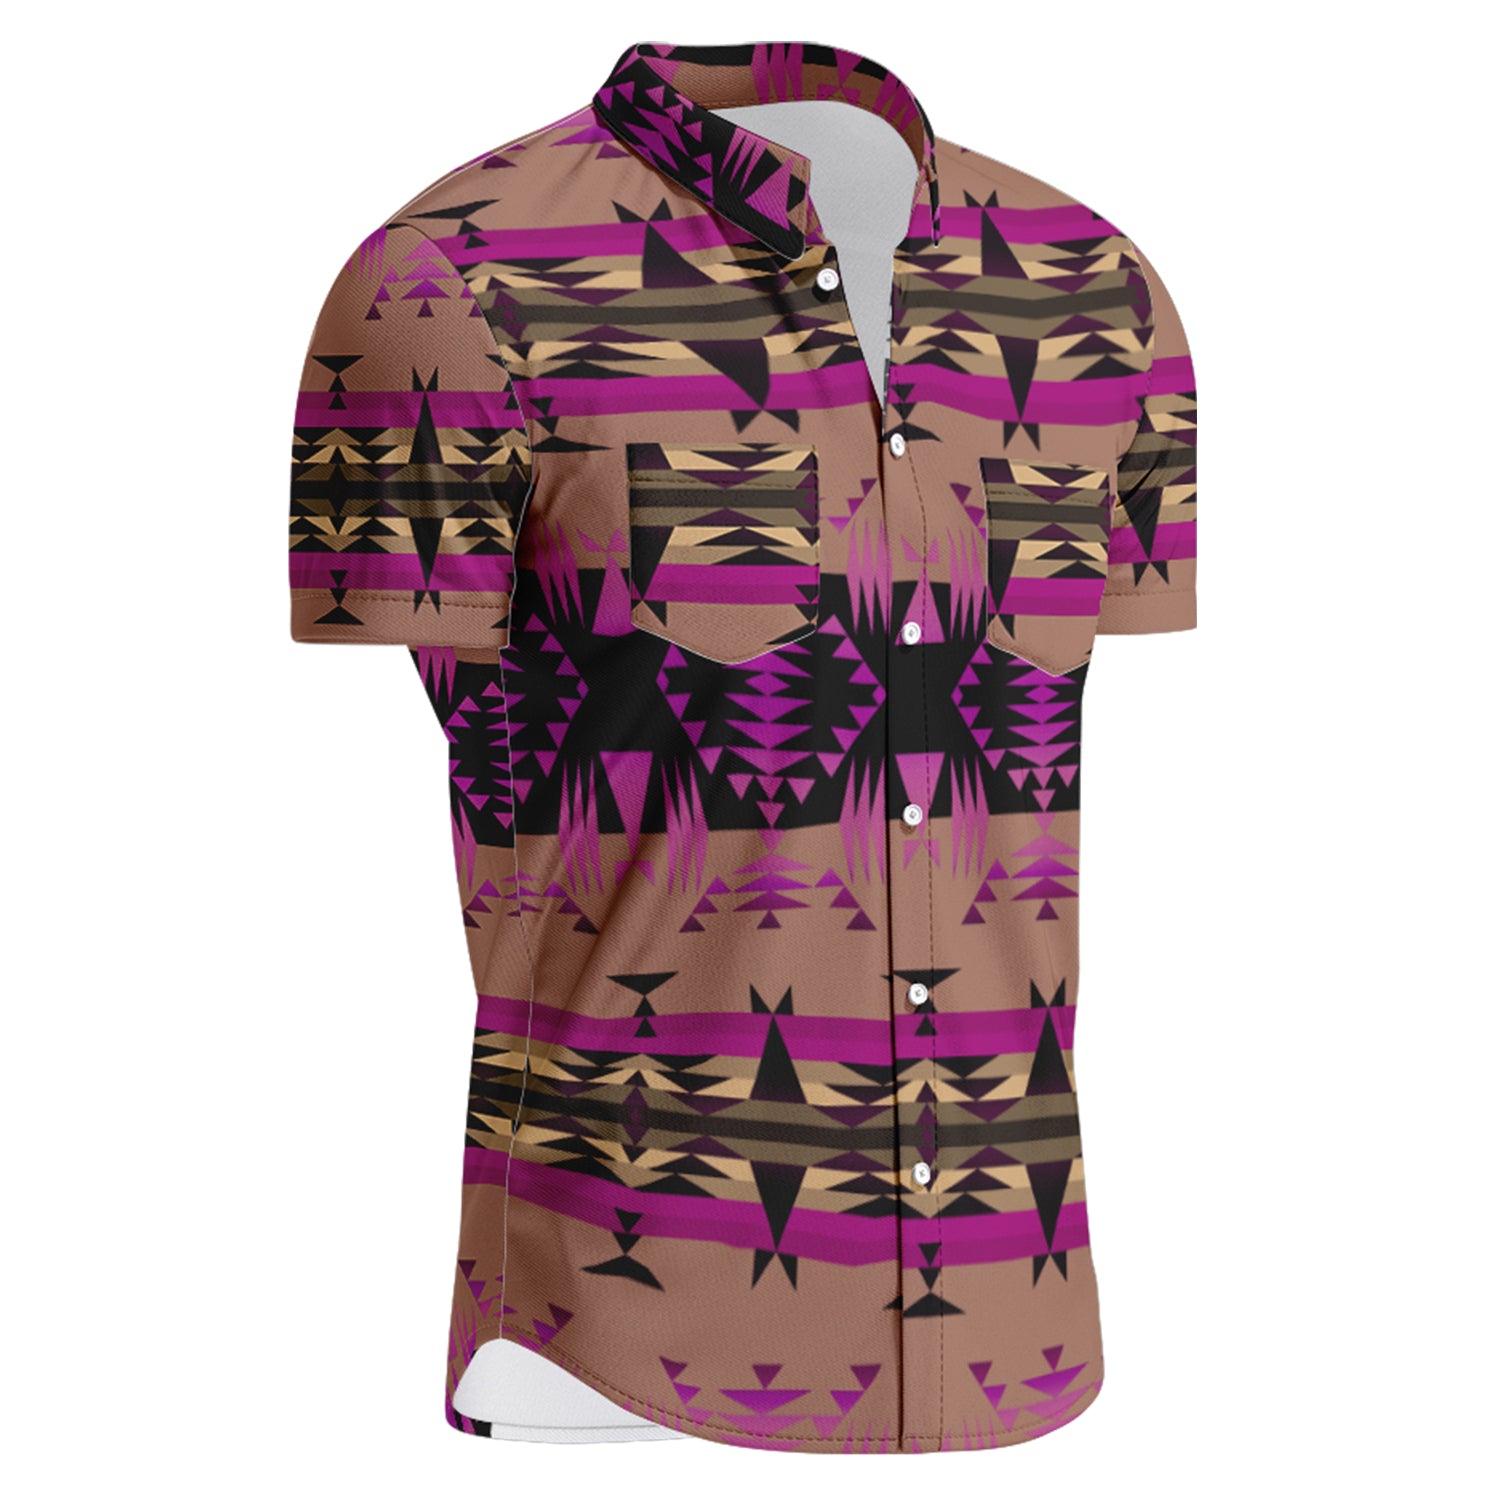 Between the Mountains Berry Hawaiian-Style Button Up Shirt